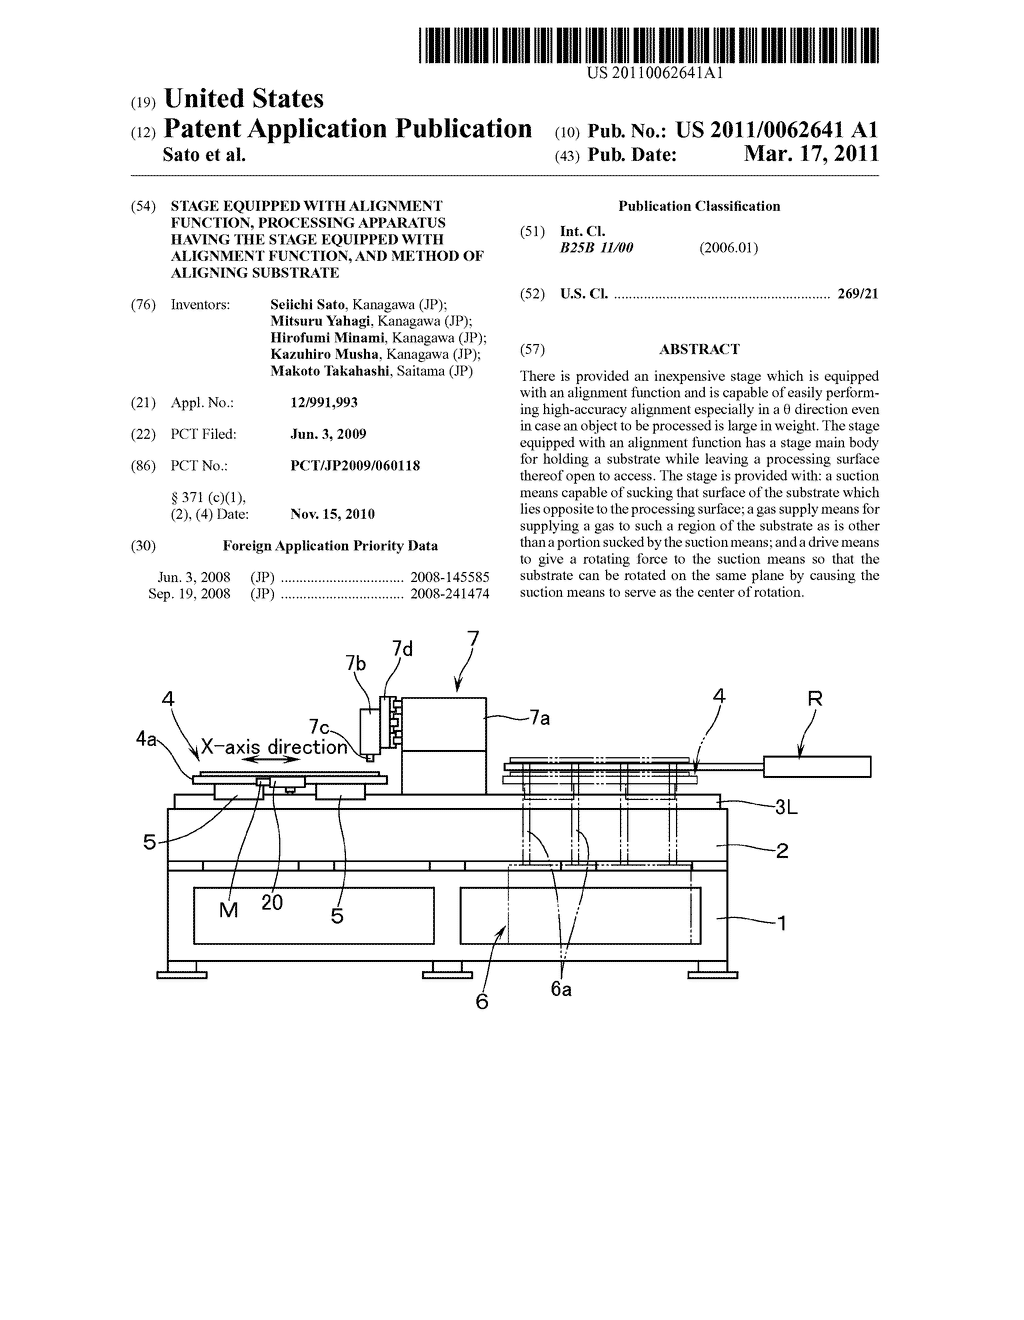 STAGE EQUIPPED WITH ALIGNMENT FUNCTION, PROCESSING APPARATUS HAVING THE STAGE EQUIPPED WITH ALIGNMENT FUNCTION, AND METHOD OF ALIGNING SUBSTRATE - diagram, schematic, and image 01